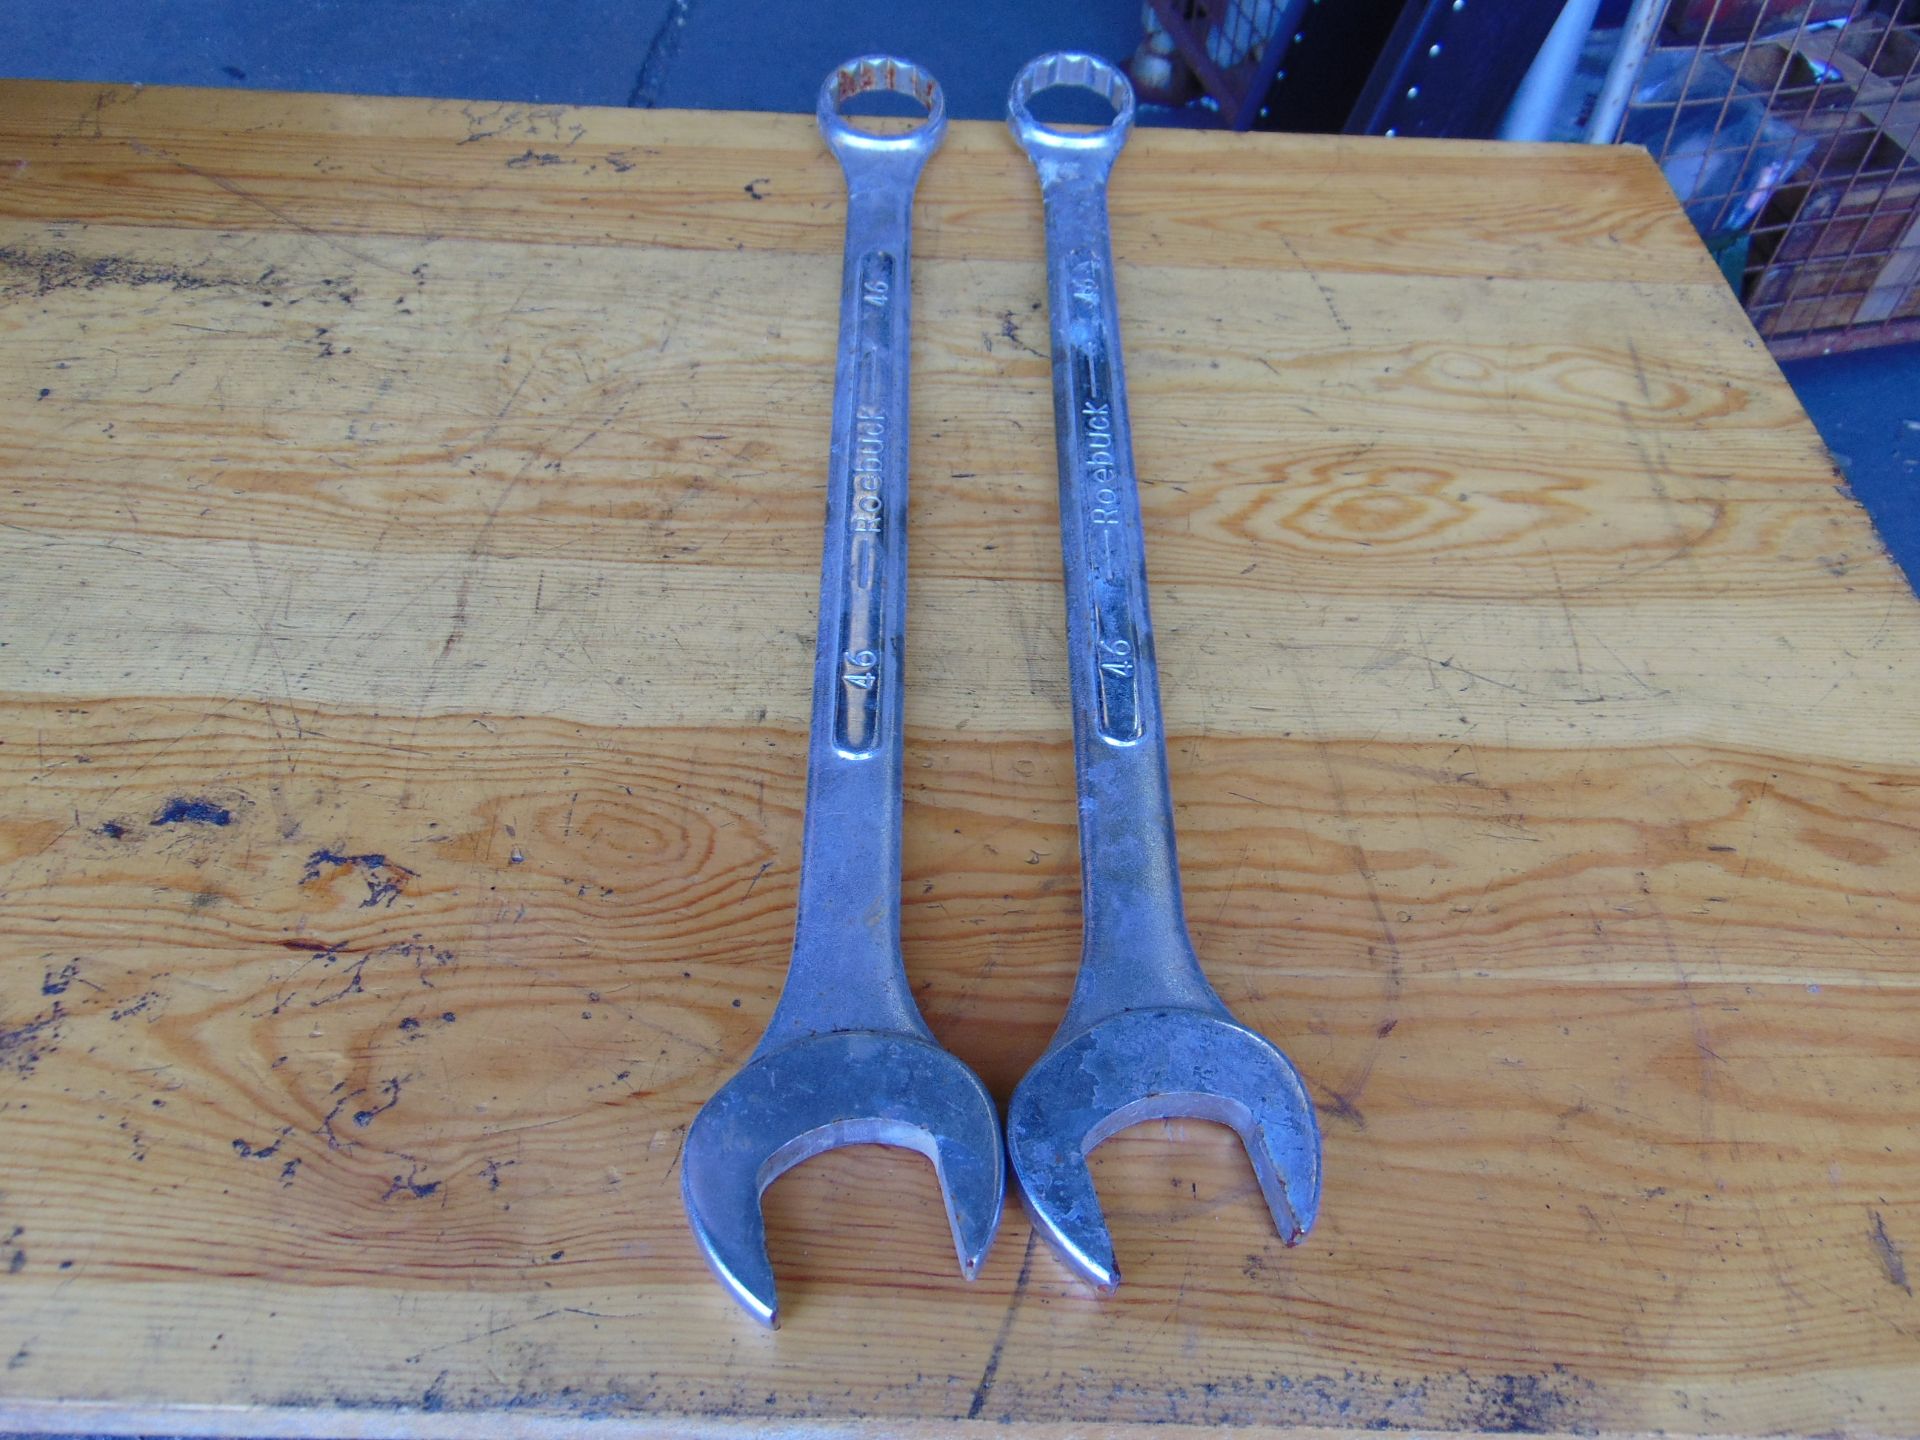 2 x Roebuck 46mm Spanners from MoD